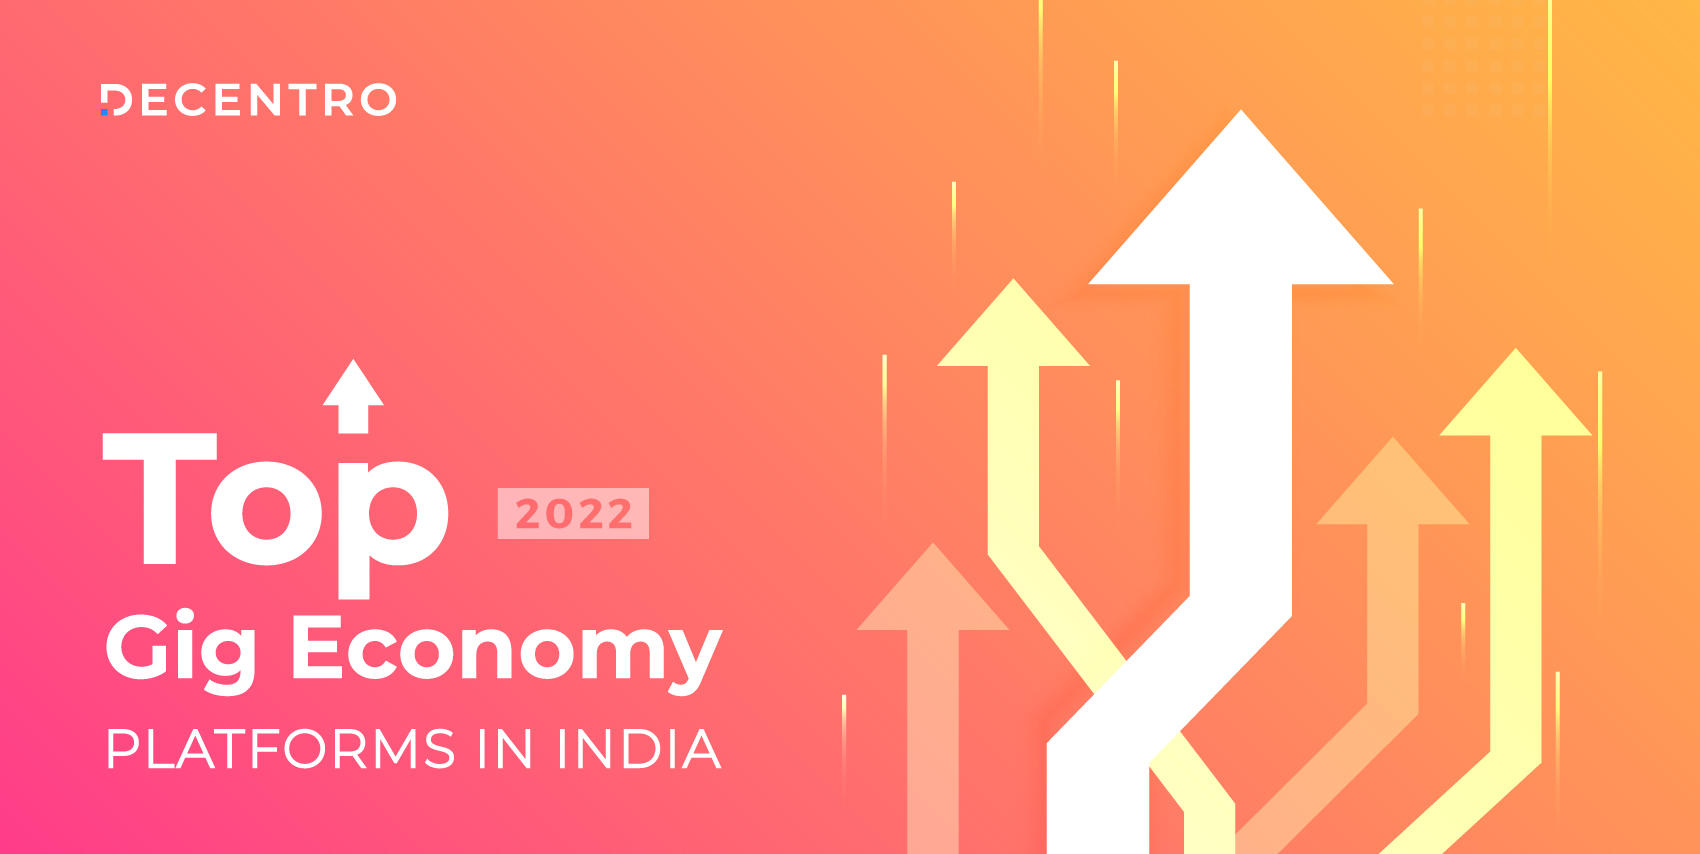 A list of the top gig economy platforms in India for 2022.